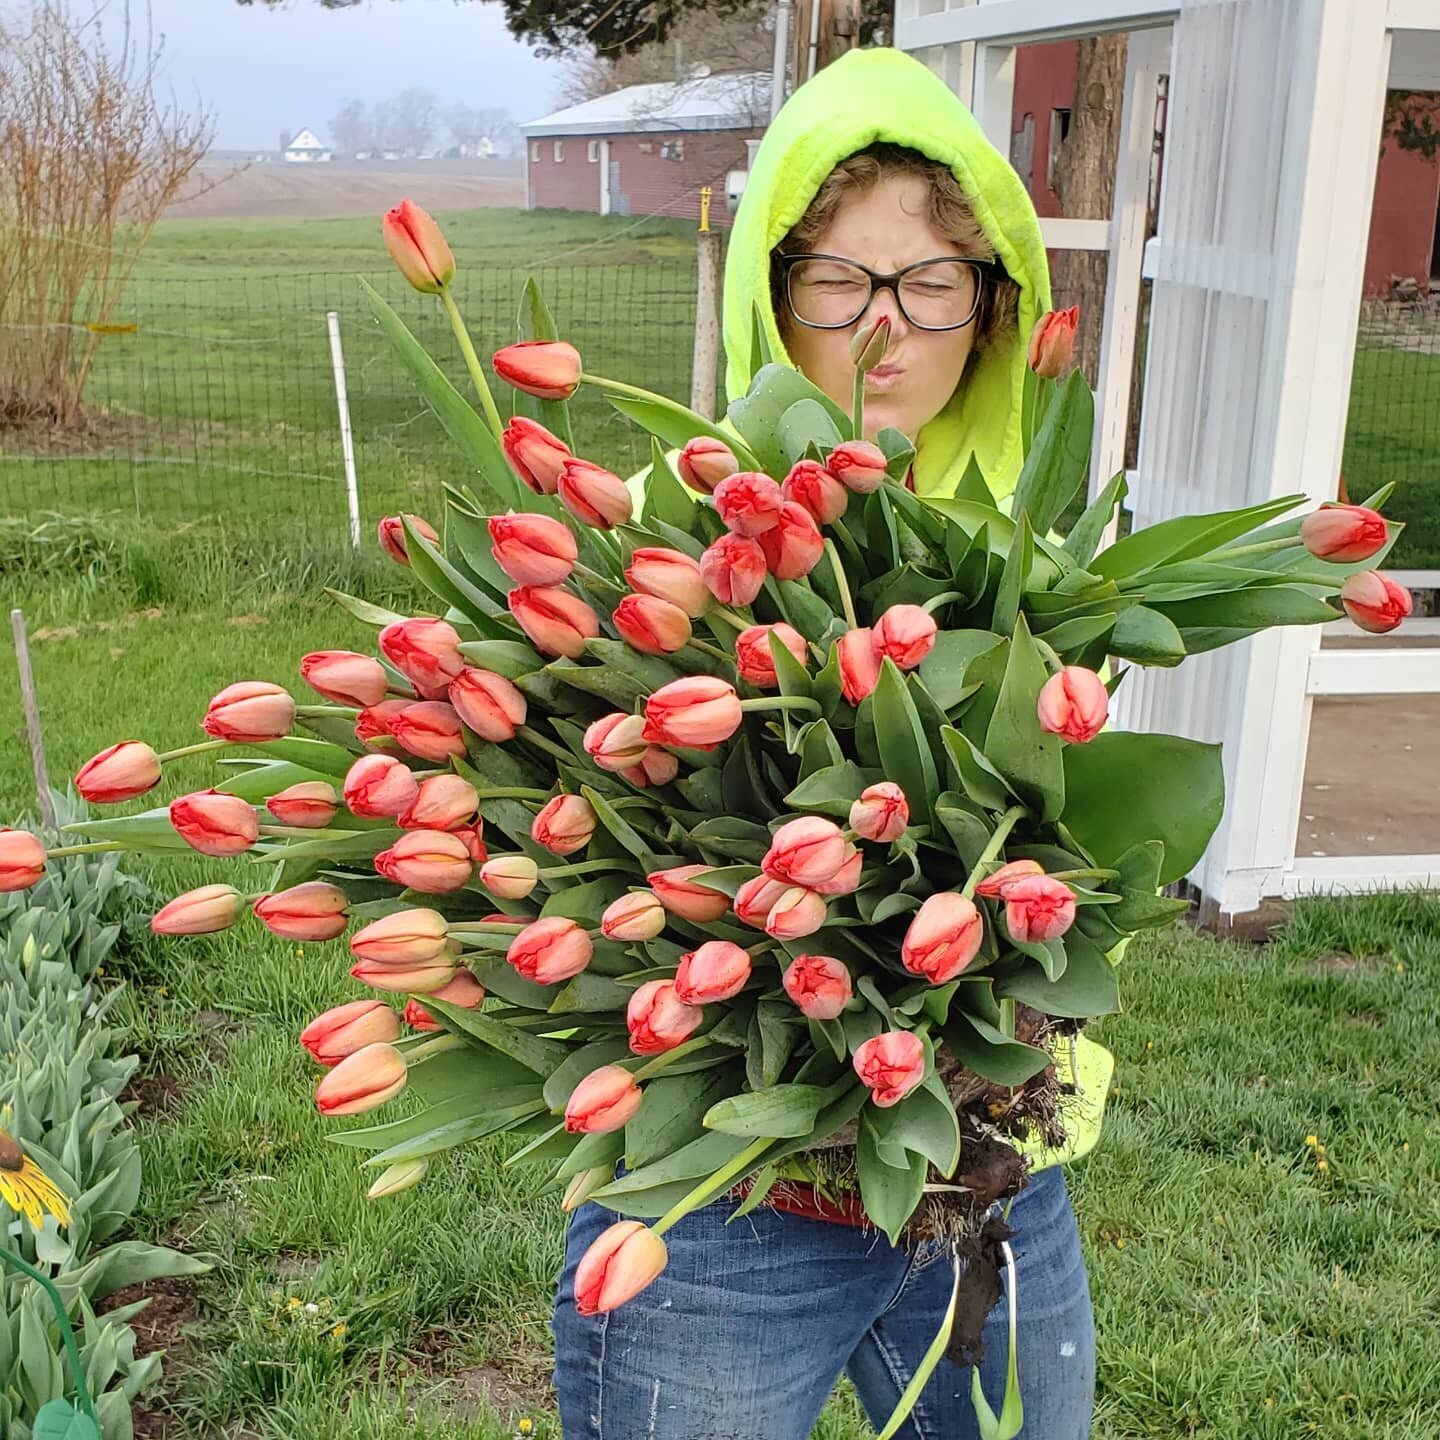 We're inching closer to the 'wake up and pull thousands of tulips' time.